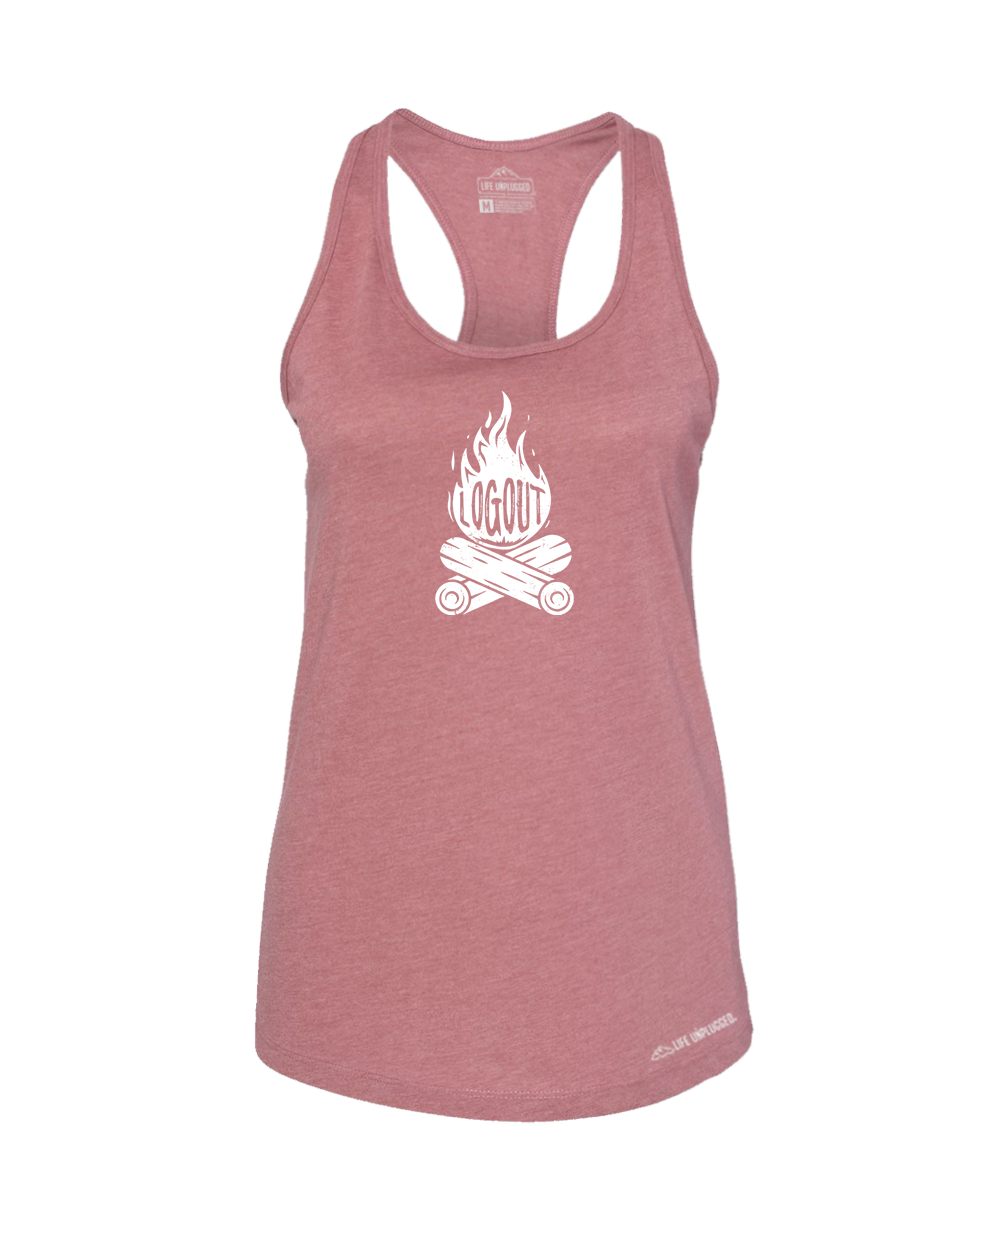 Log Out Campfire Premium Women's Relaxed Fit Racerback Tank Top - Life Unplugged